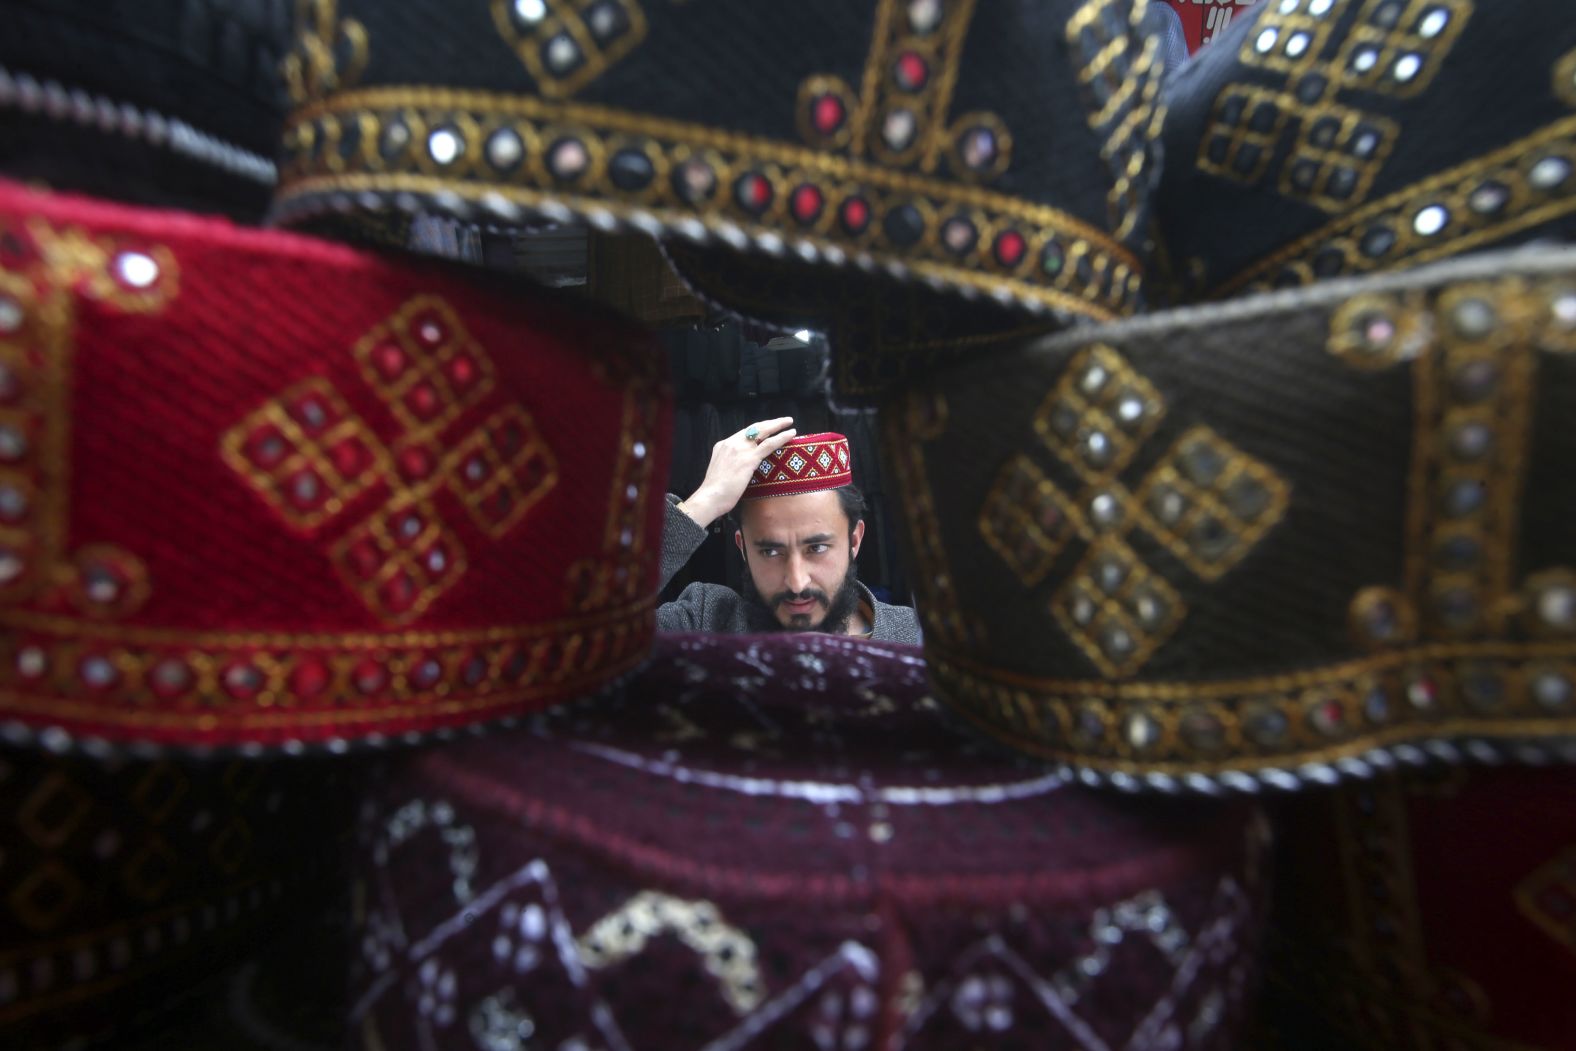 A man tries on a traditional cap which will be used while praying during Ramadan, at a stall in Peshawar, Pakistan. 